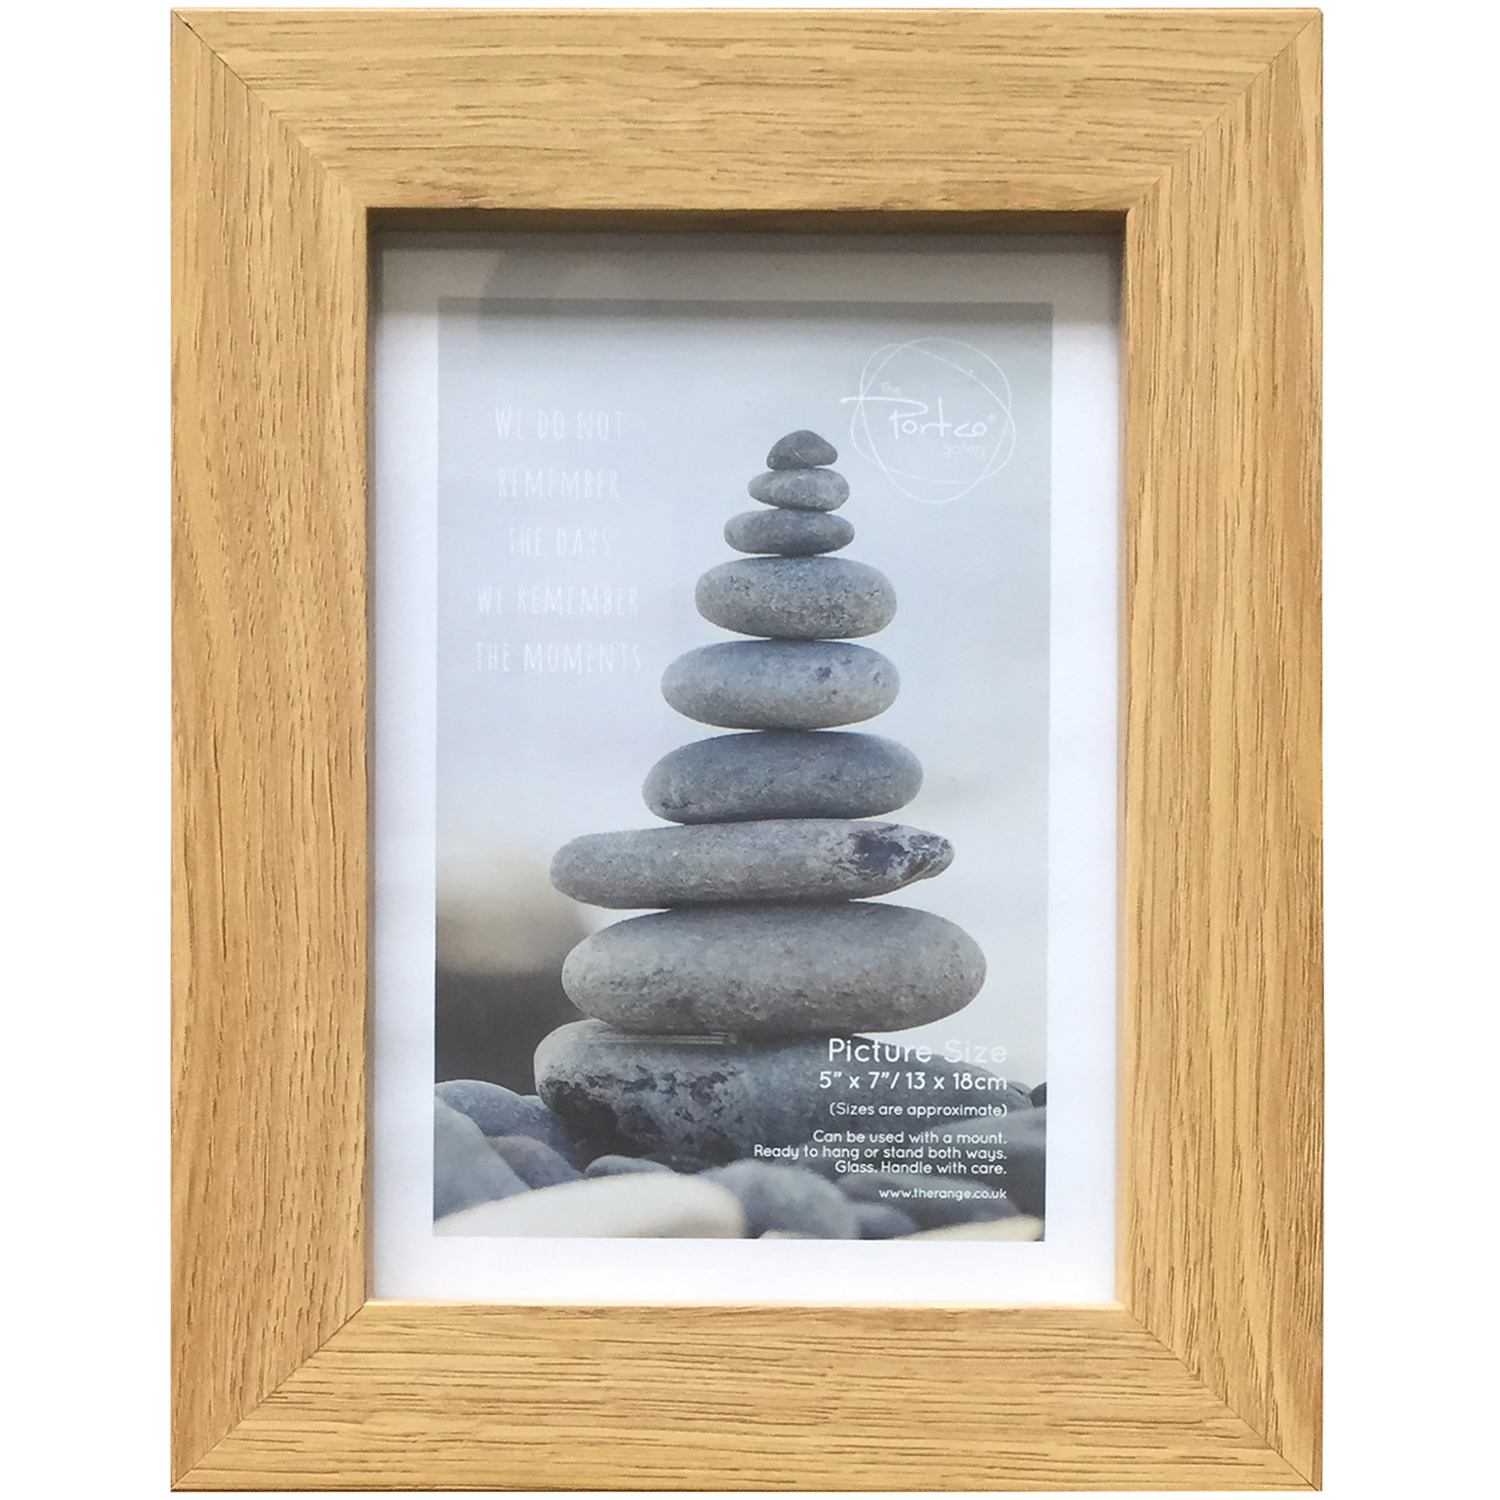 The Port. Co Gallery Wood Effect Somerset Photo Frame 8 x 6 inch Image